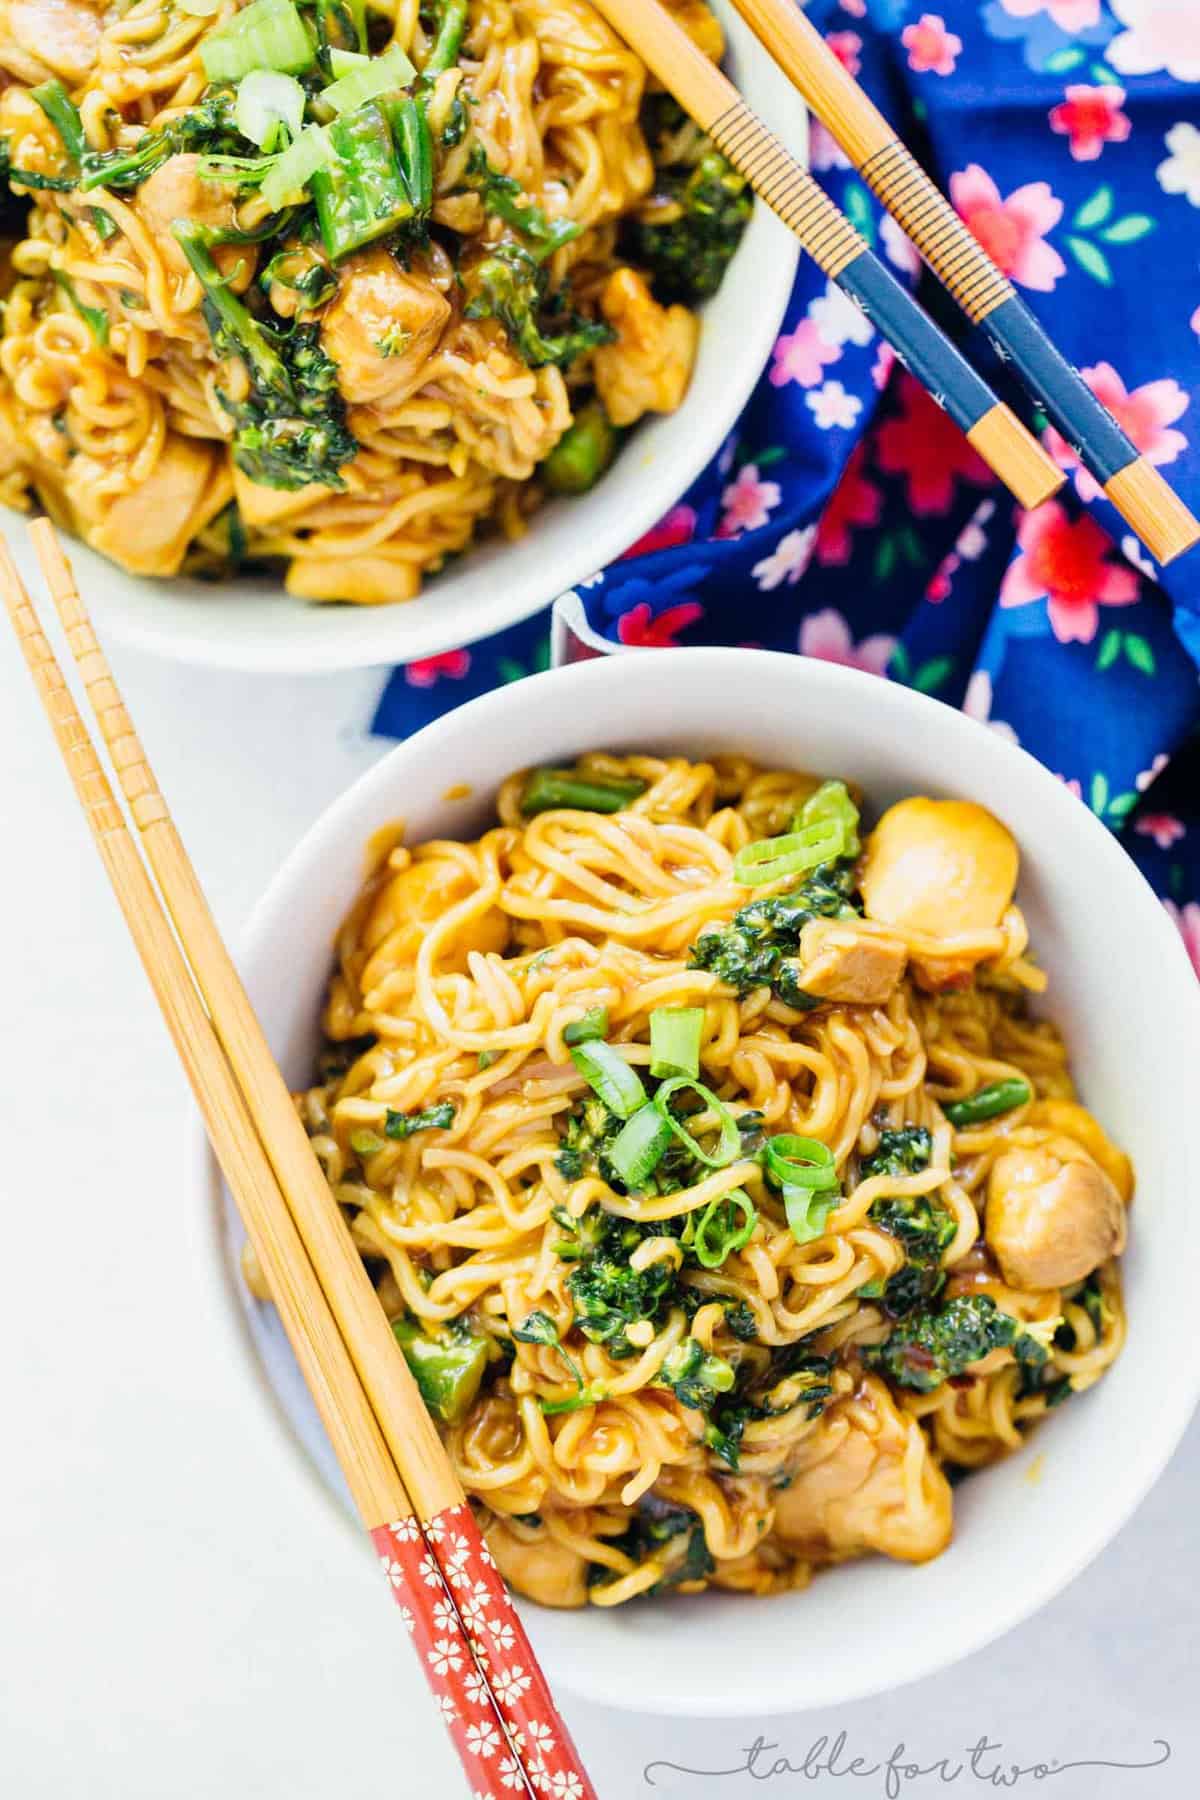 You don't have to go very far to get this classic Chinese take-out dish combined with ramen! So easy to make at home that you won't need to pick up the phone! General Tso's chicken ramen is the best combination of fast, quick dinners!